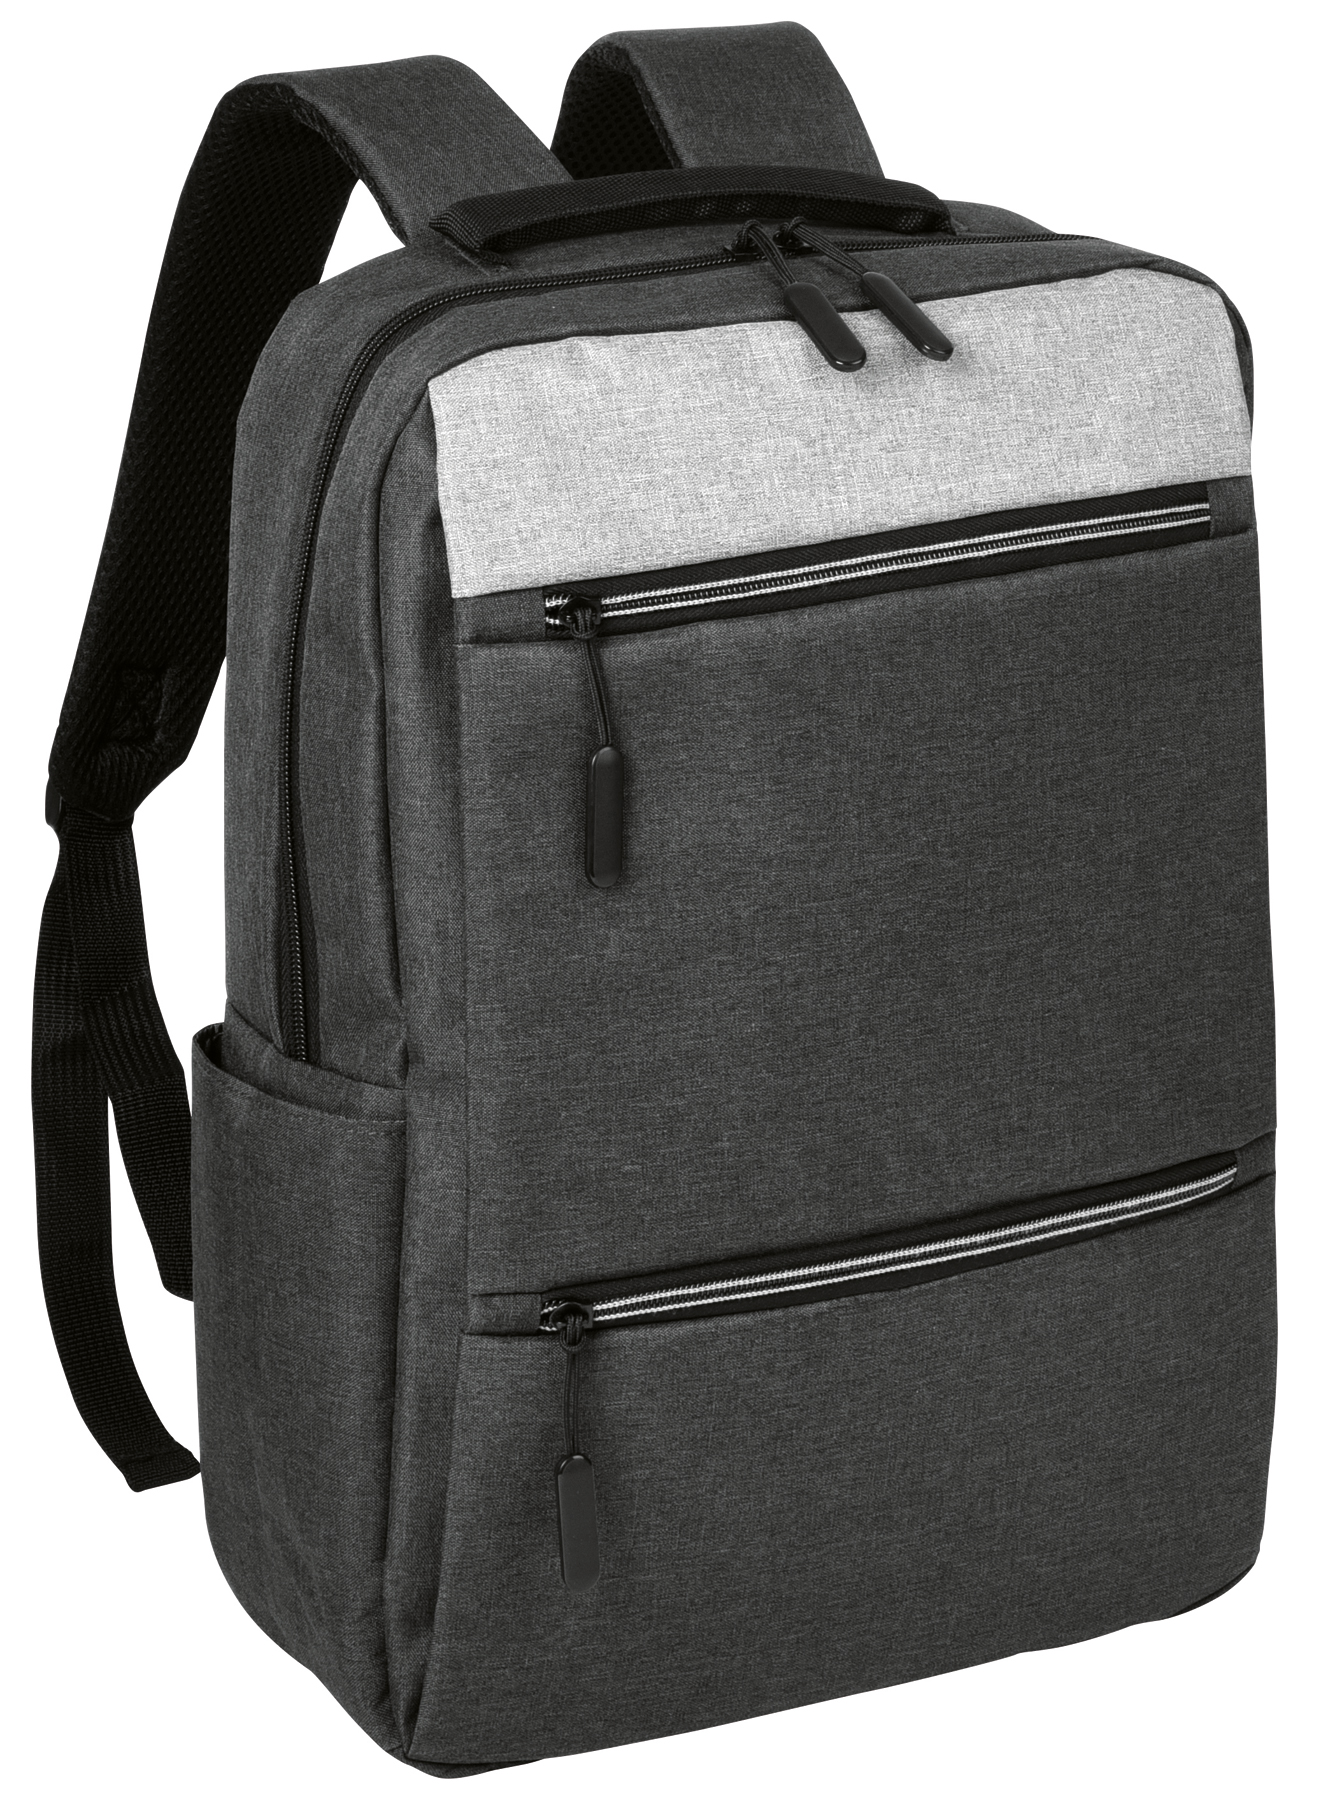 Backpack NORDIC LINE - stone grey